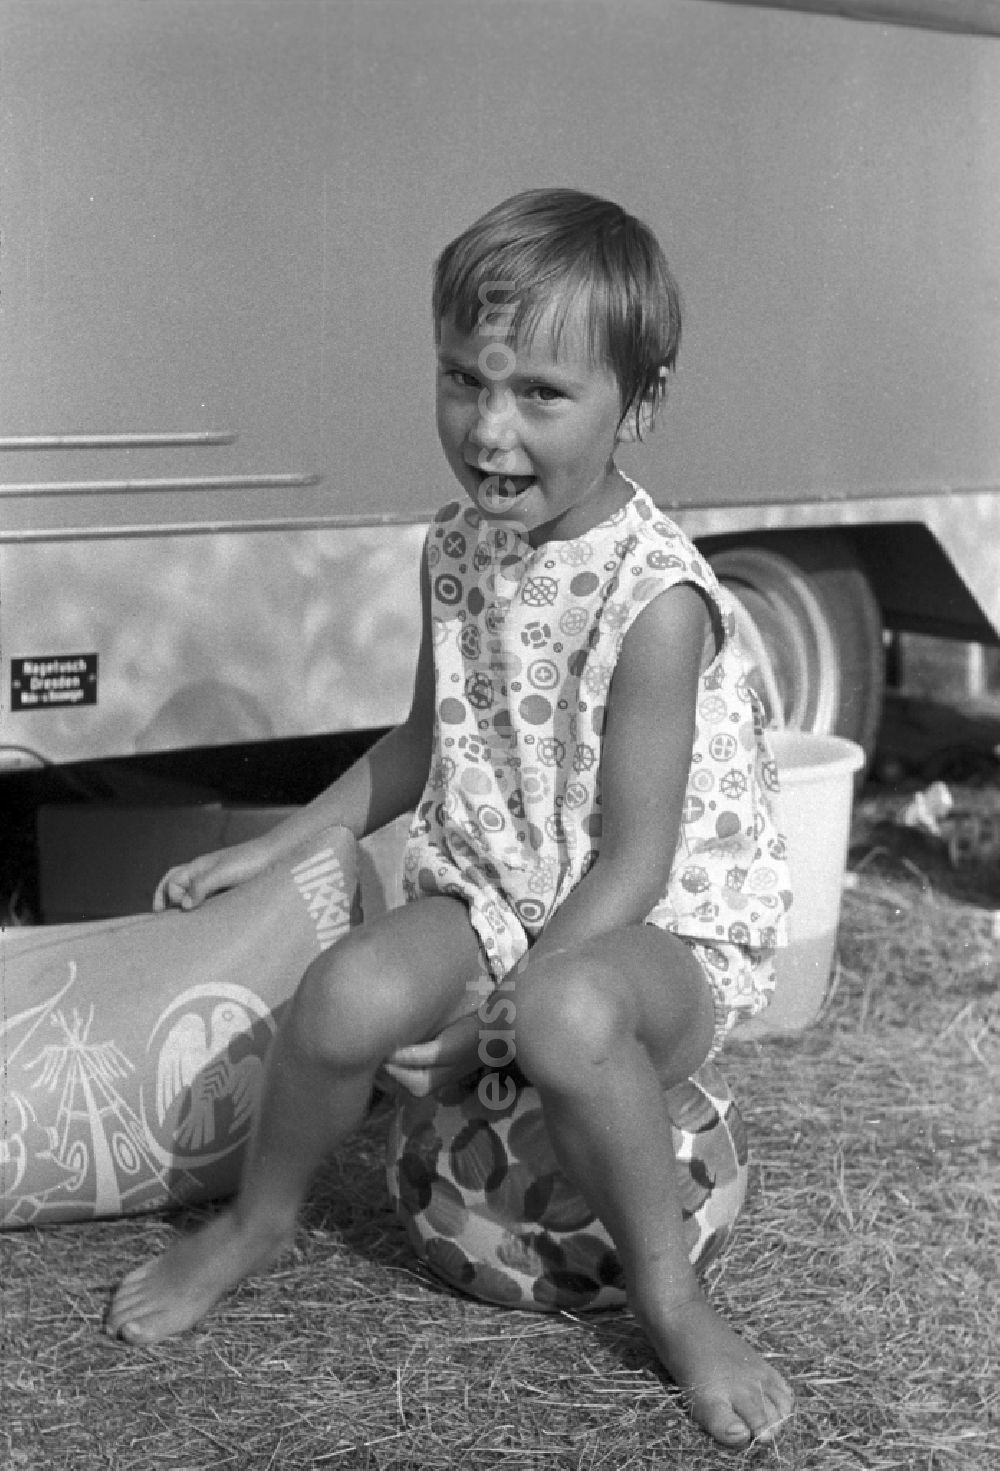 Neuruppin OT Stendenitz: A small child sits on a ball, laughing mischievously in Brandenburg. Family camping holidays at Rottstielfließ on Tornowsee in Brandenburg